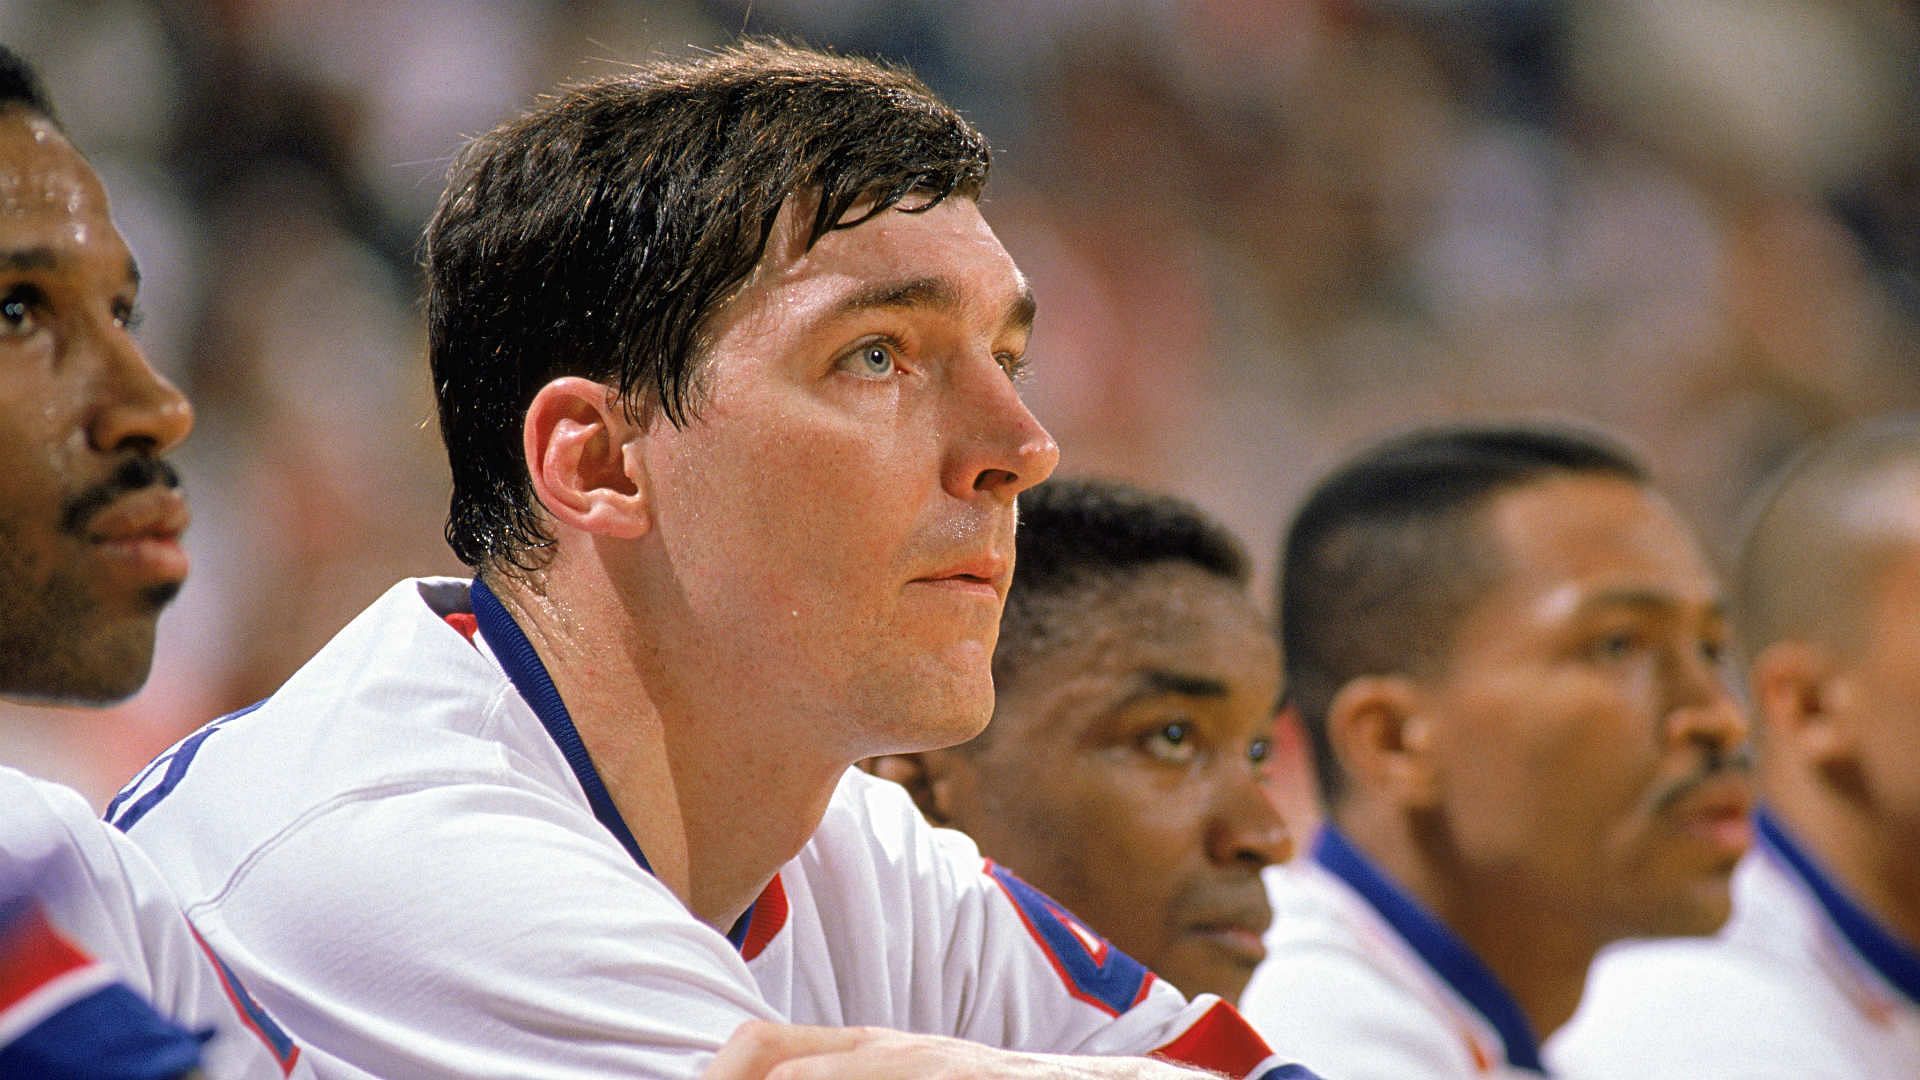 Bill Laimbeer, Isiah Thomas and the rest of the Detroit Pistons were verbally abused in their heydays according to Thomas. [Photo: Sporting News]